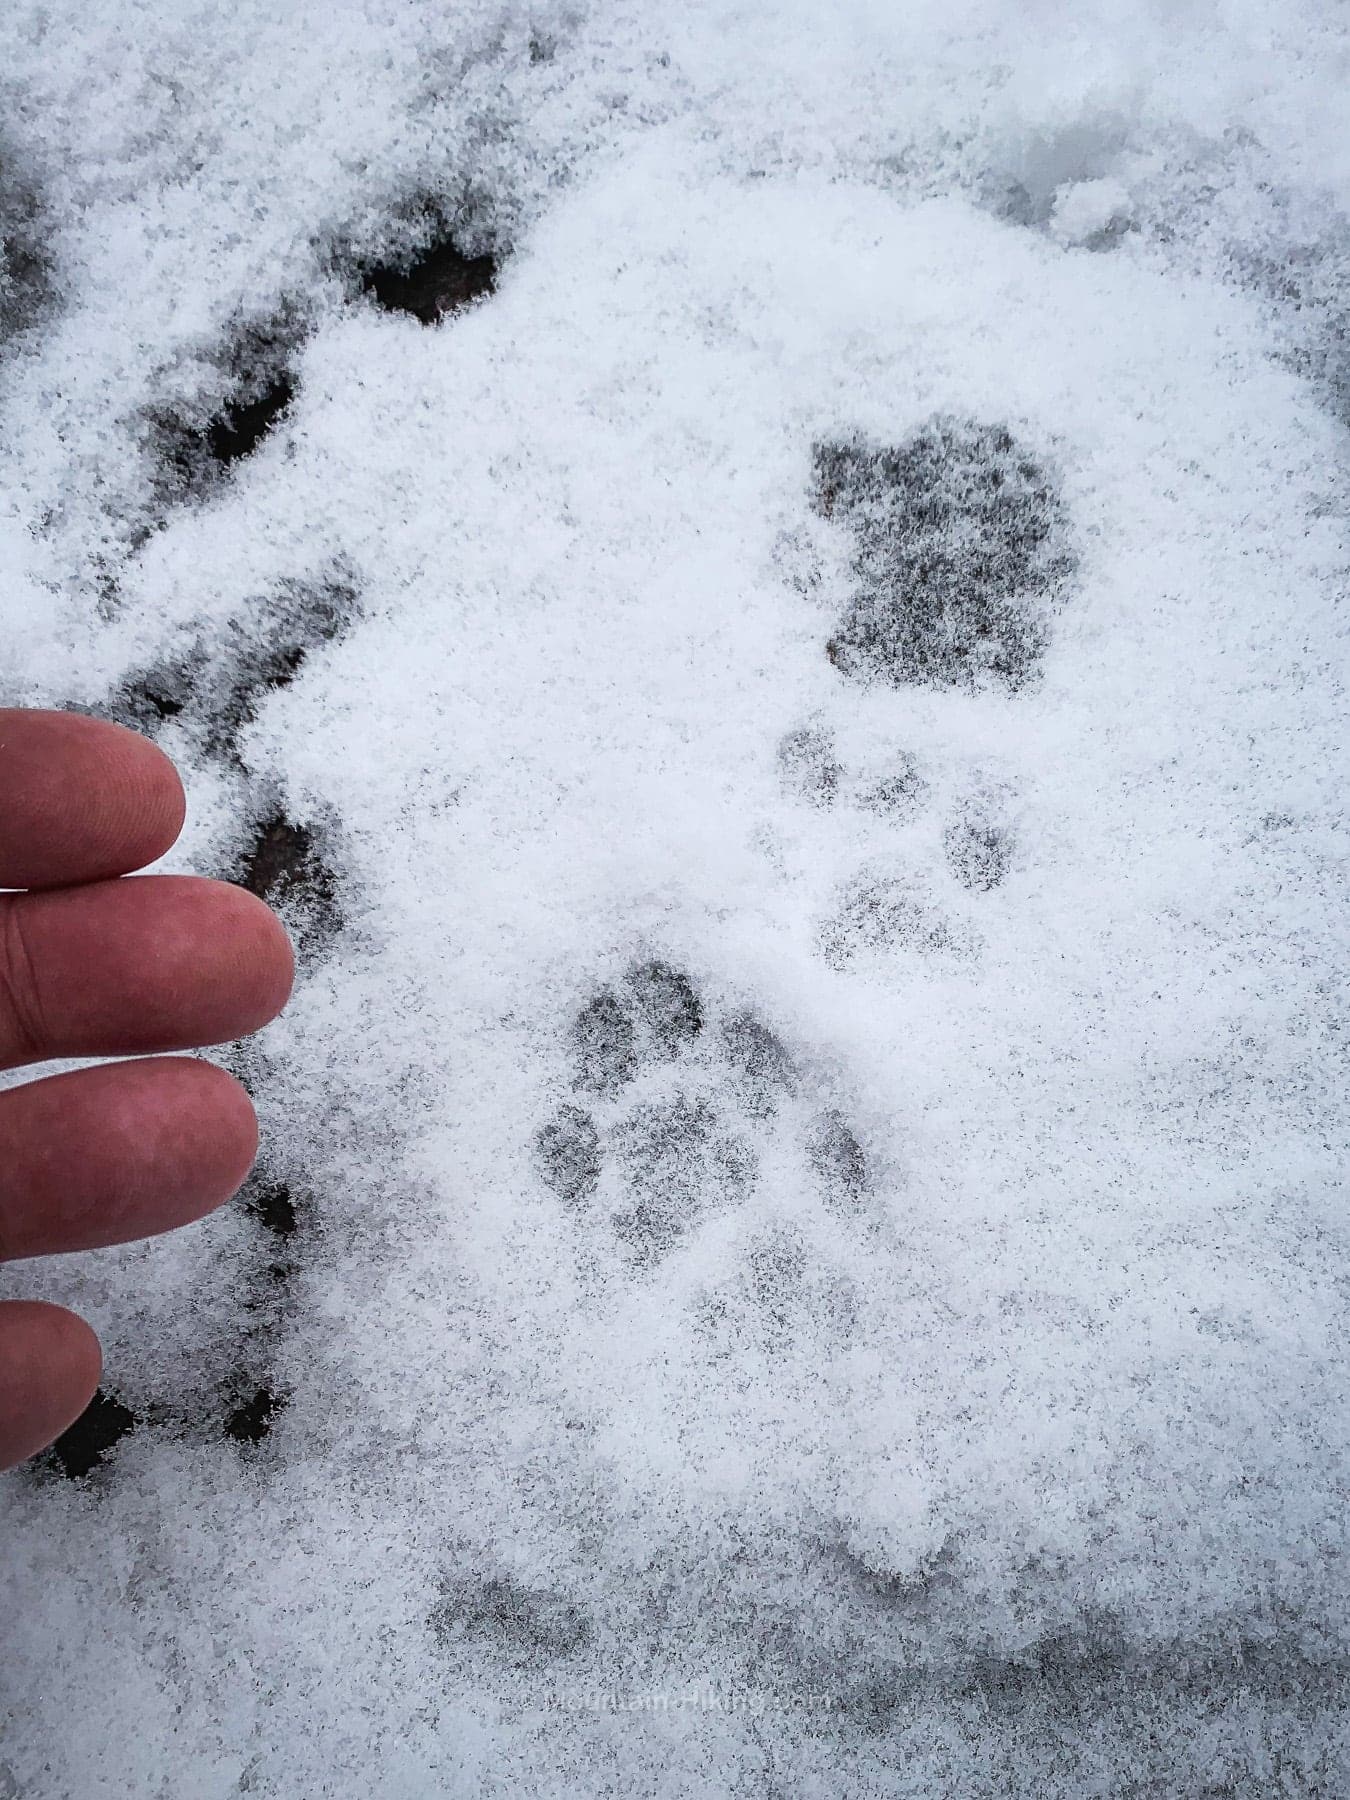 bobcat prints in snow, fingers shown for scale